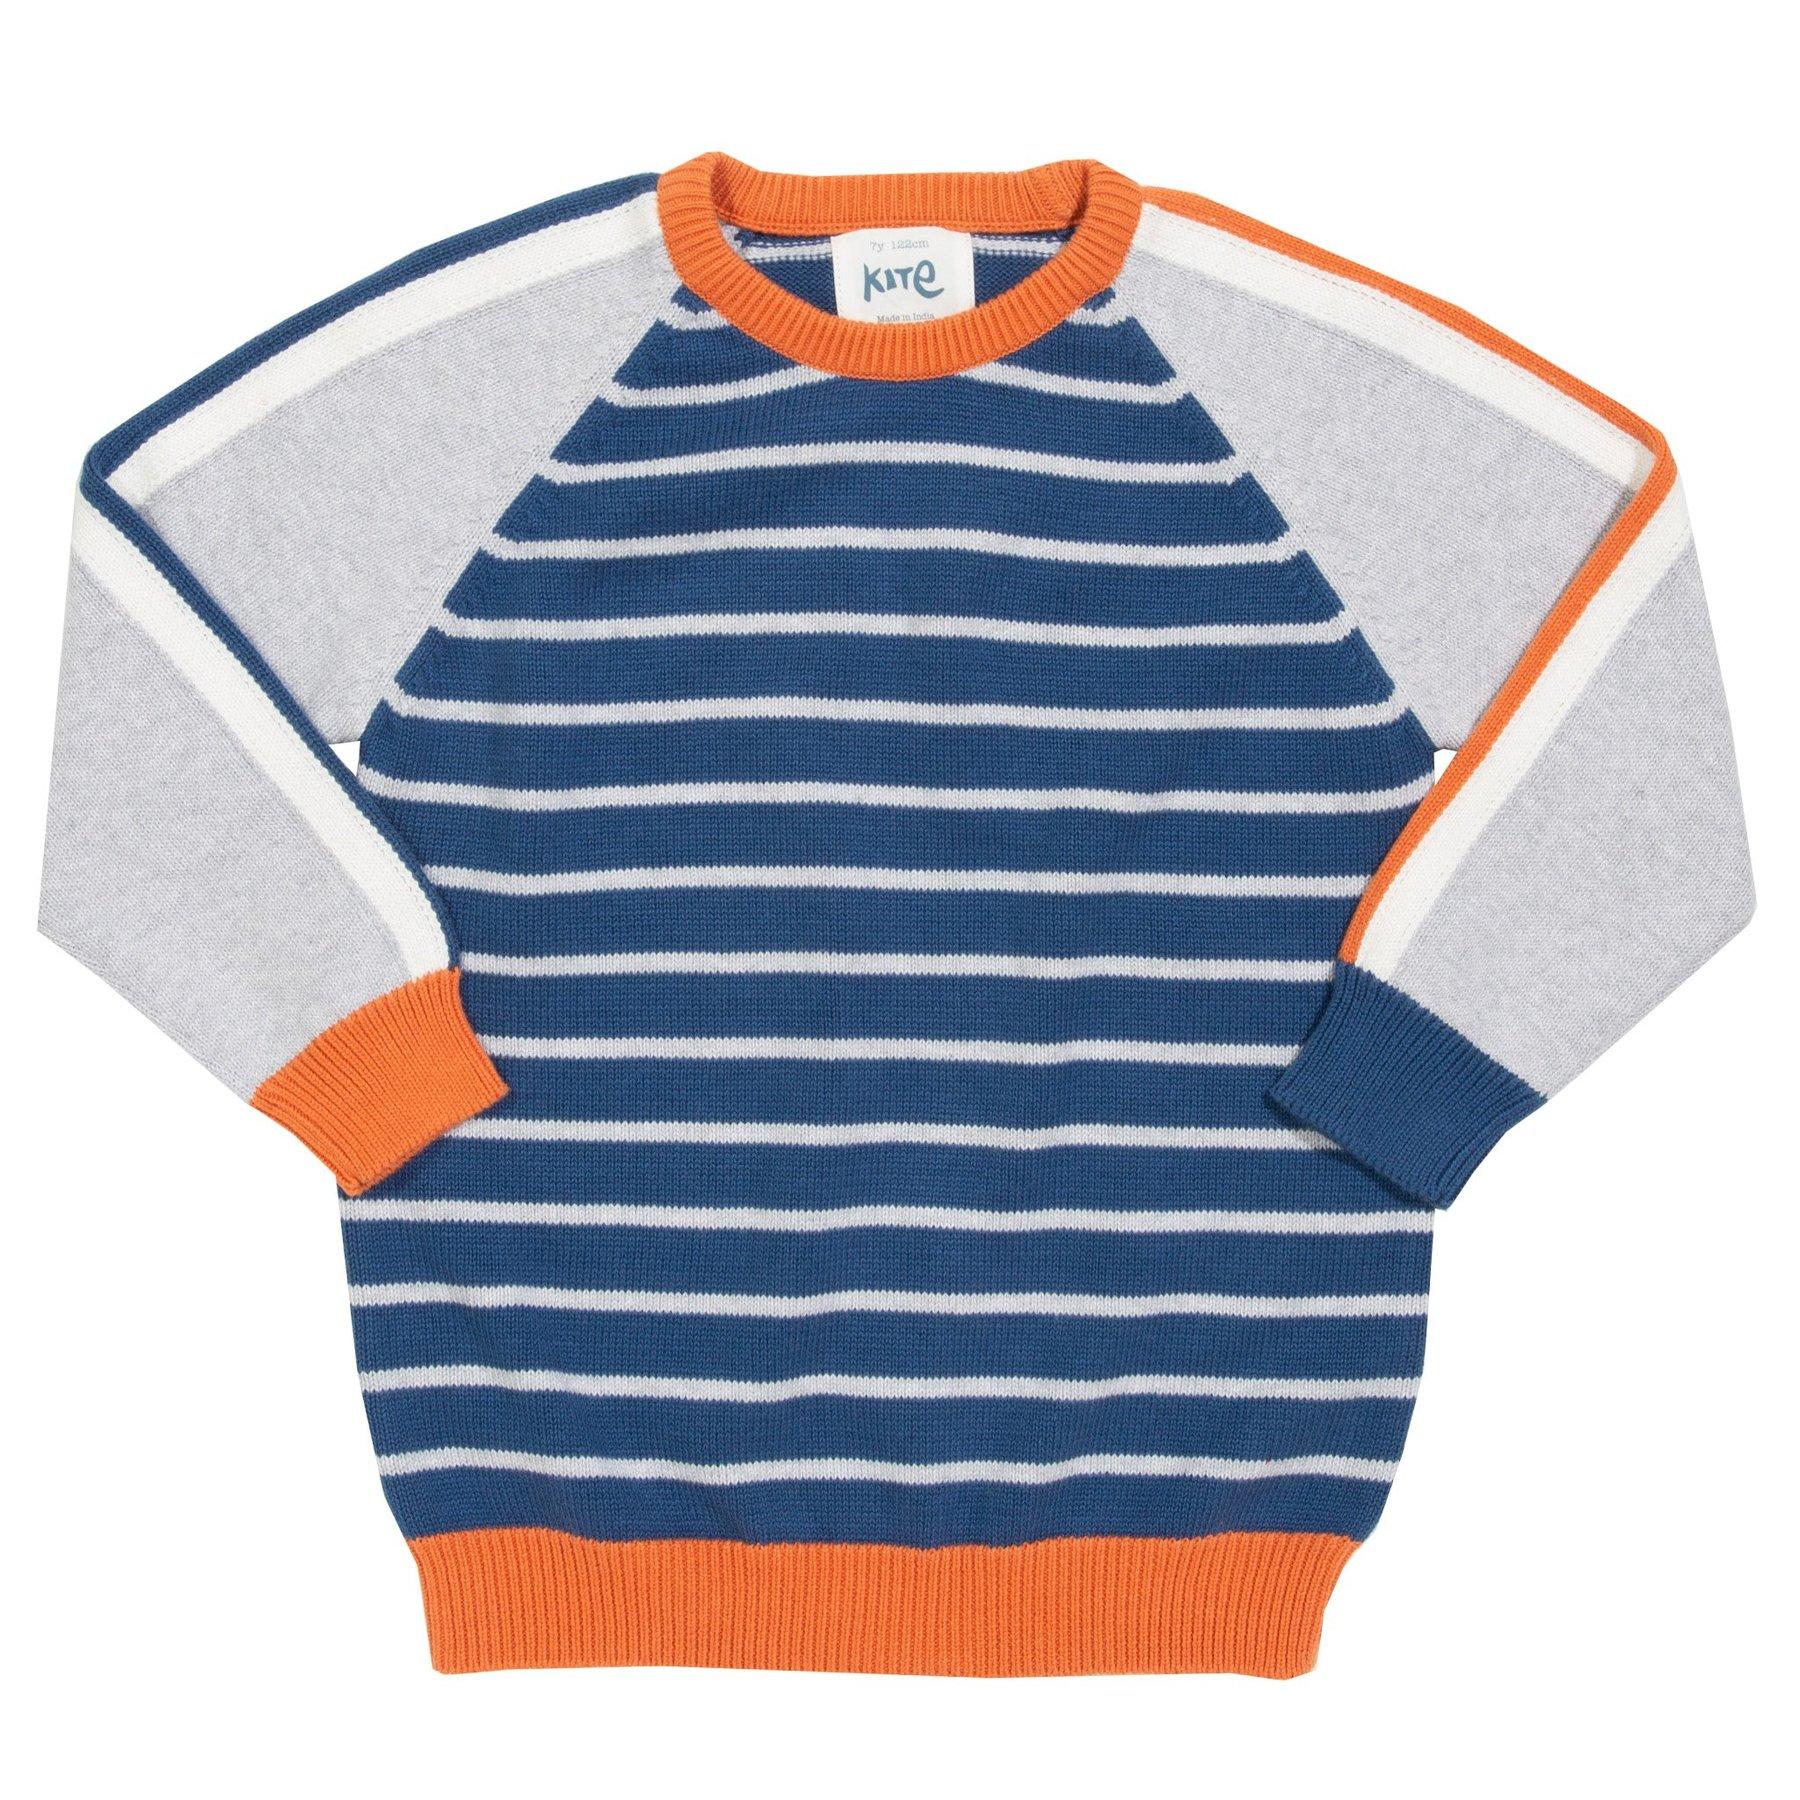 Kite Clothing Knoll Jumper front